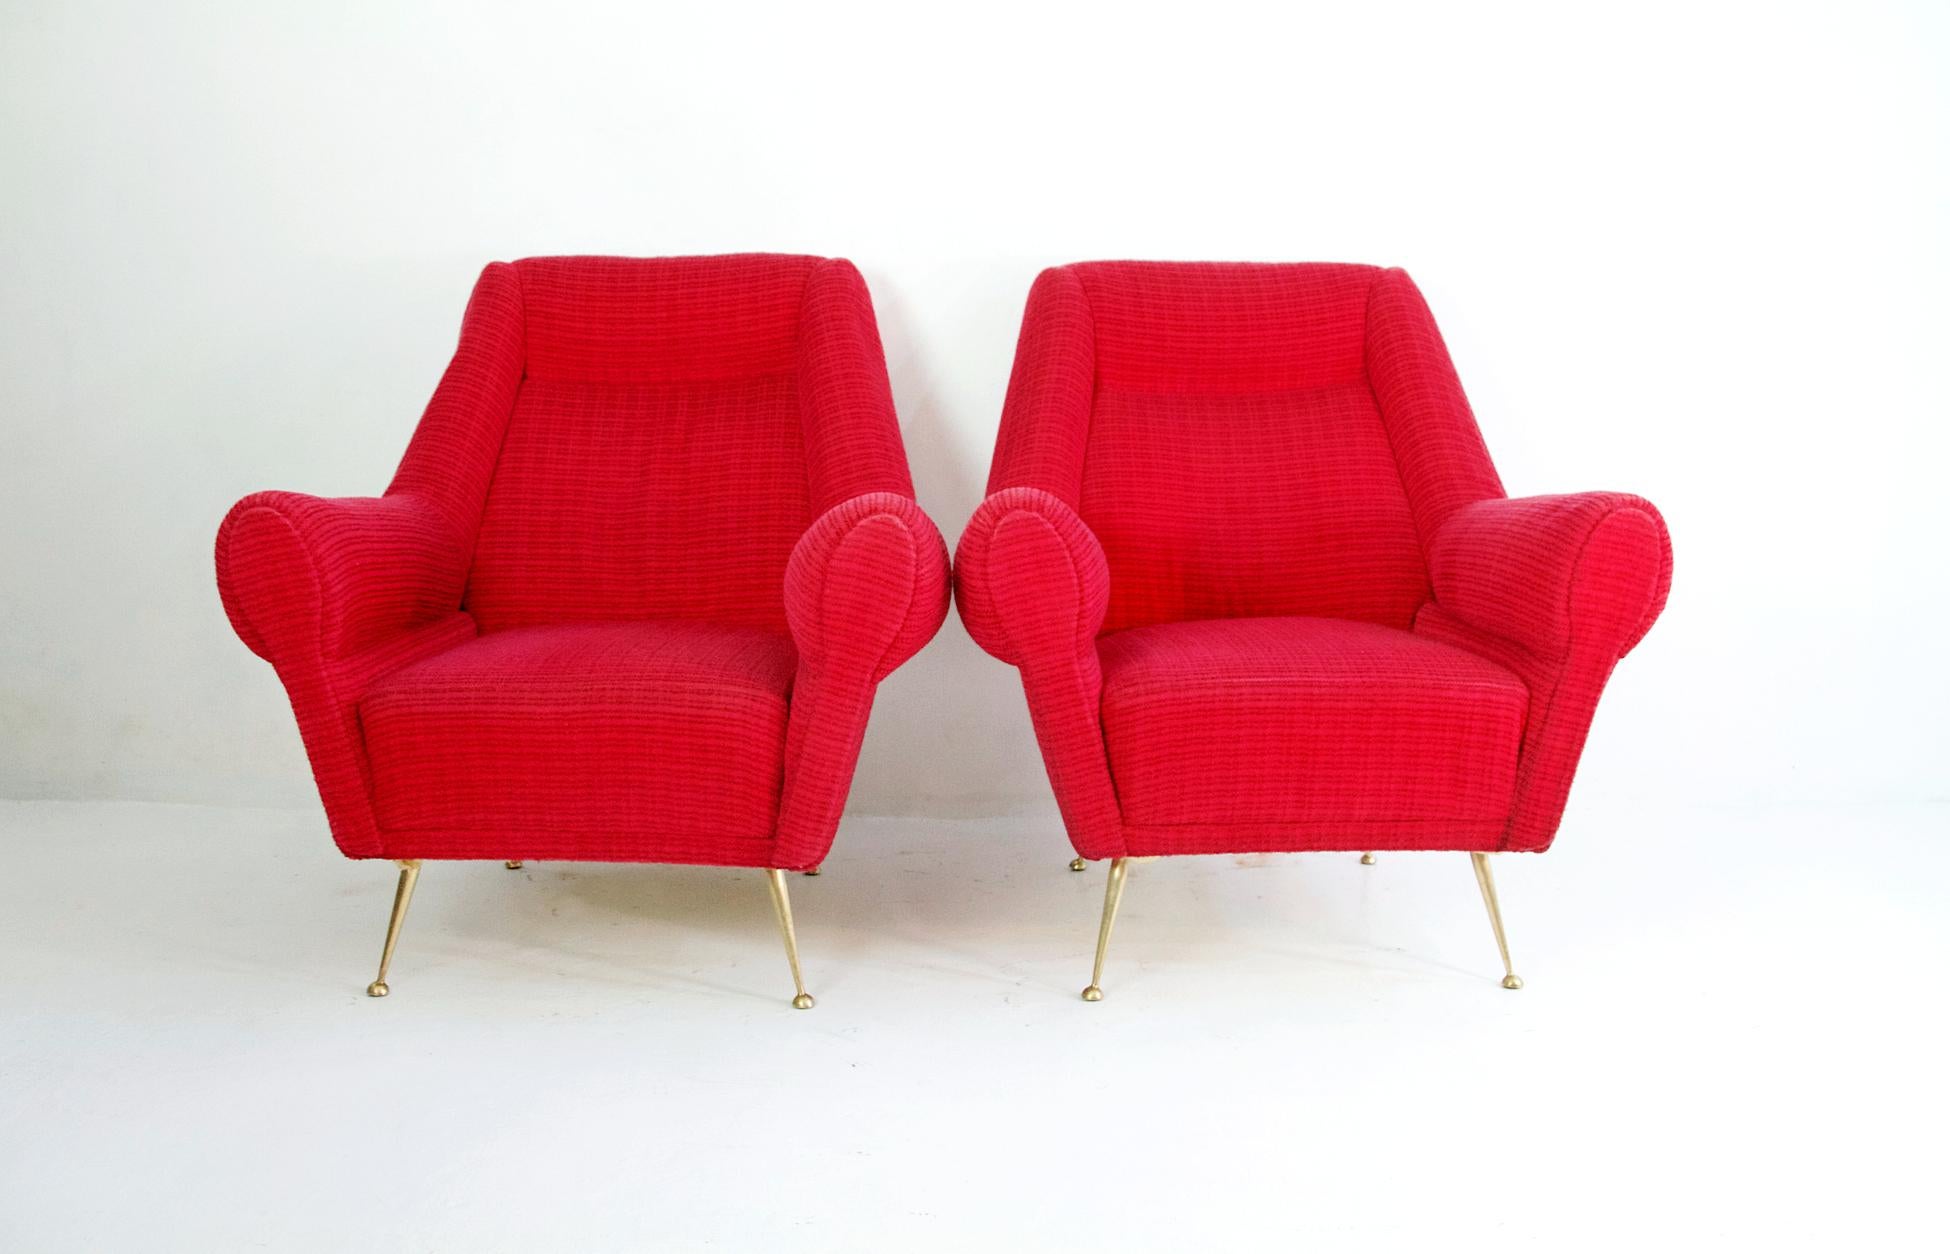 A pair of Italian armchairs designed by Gigi Radice for Minotti produced, circa 1950. The chairs haven’t been reupholstered and retain the original fabric. Legs are in solid brass.